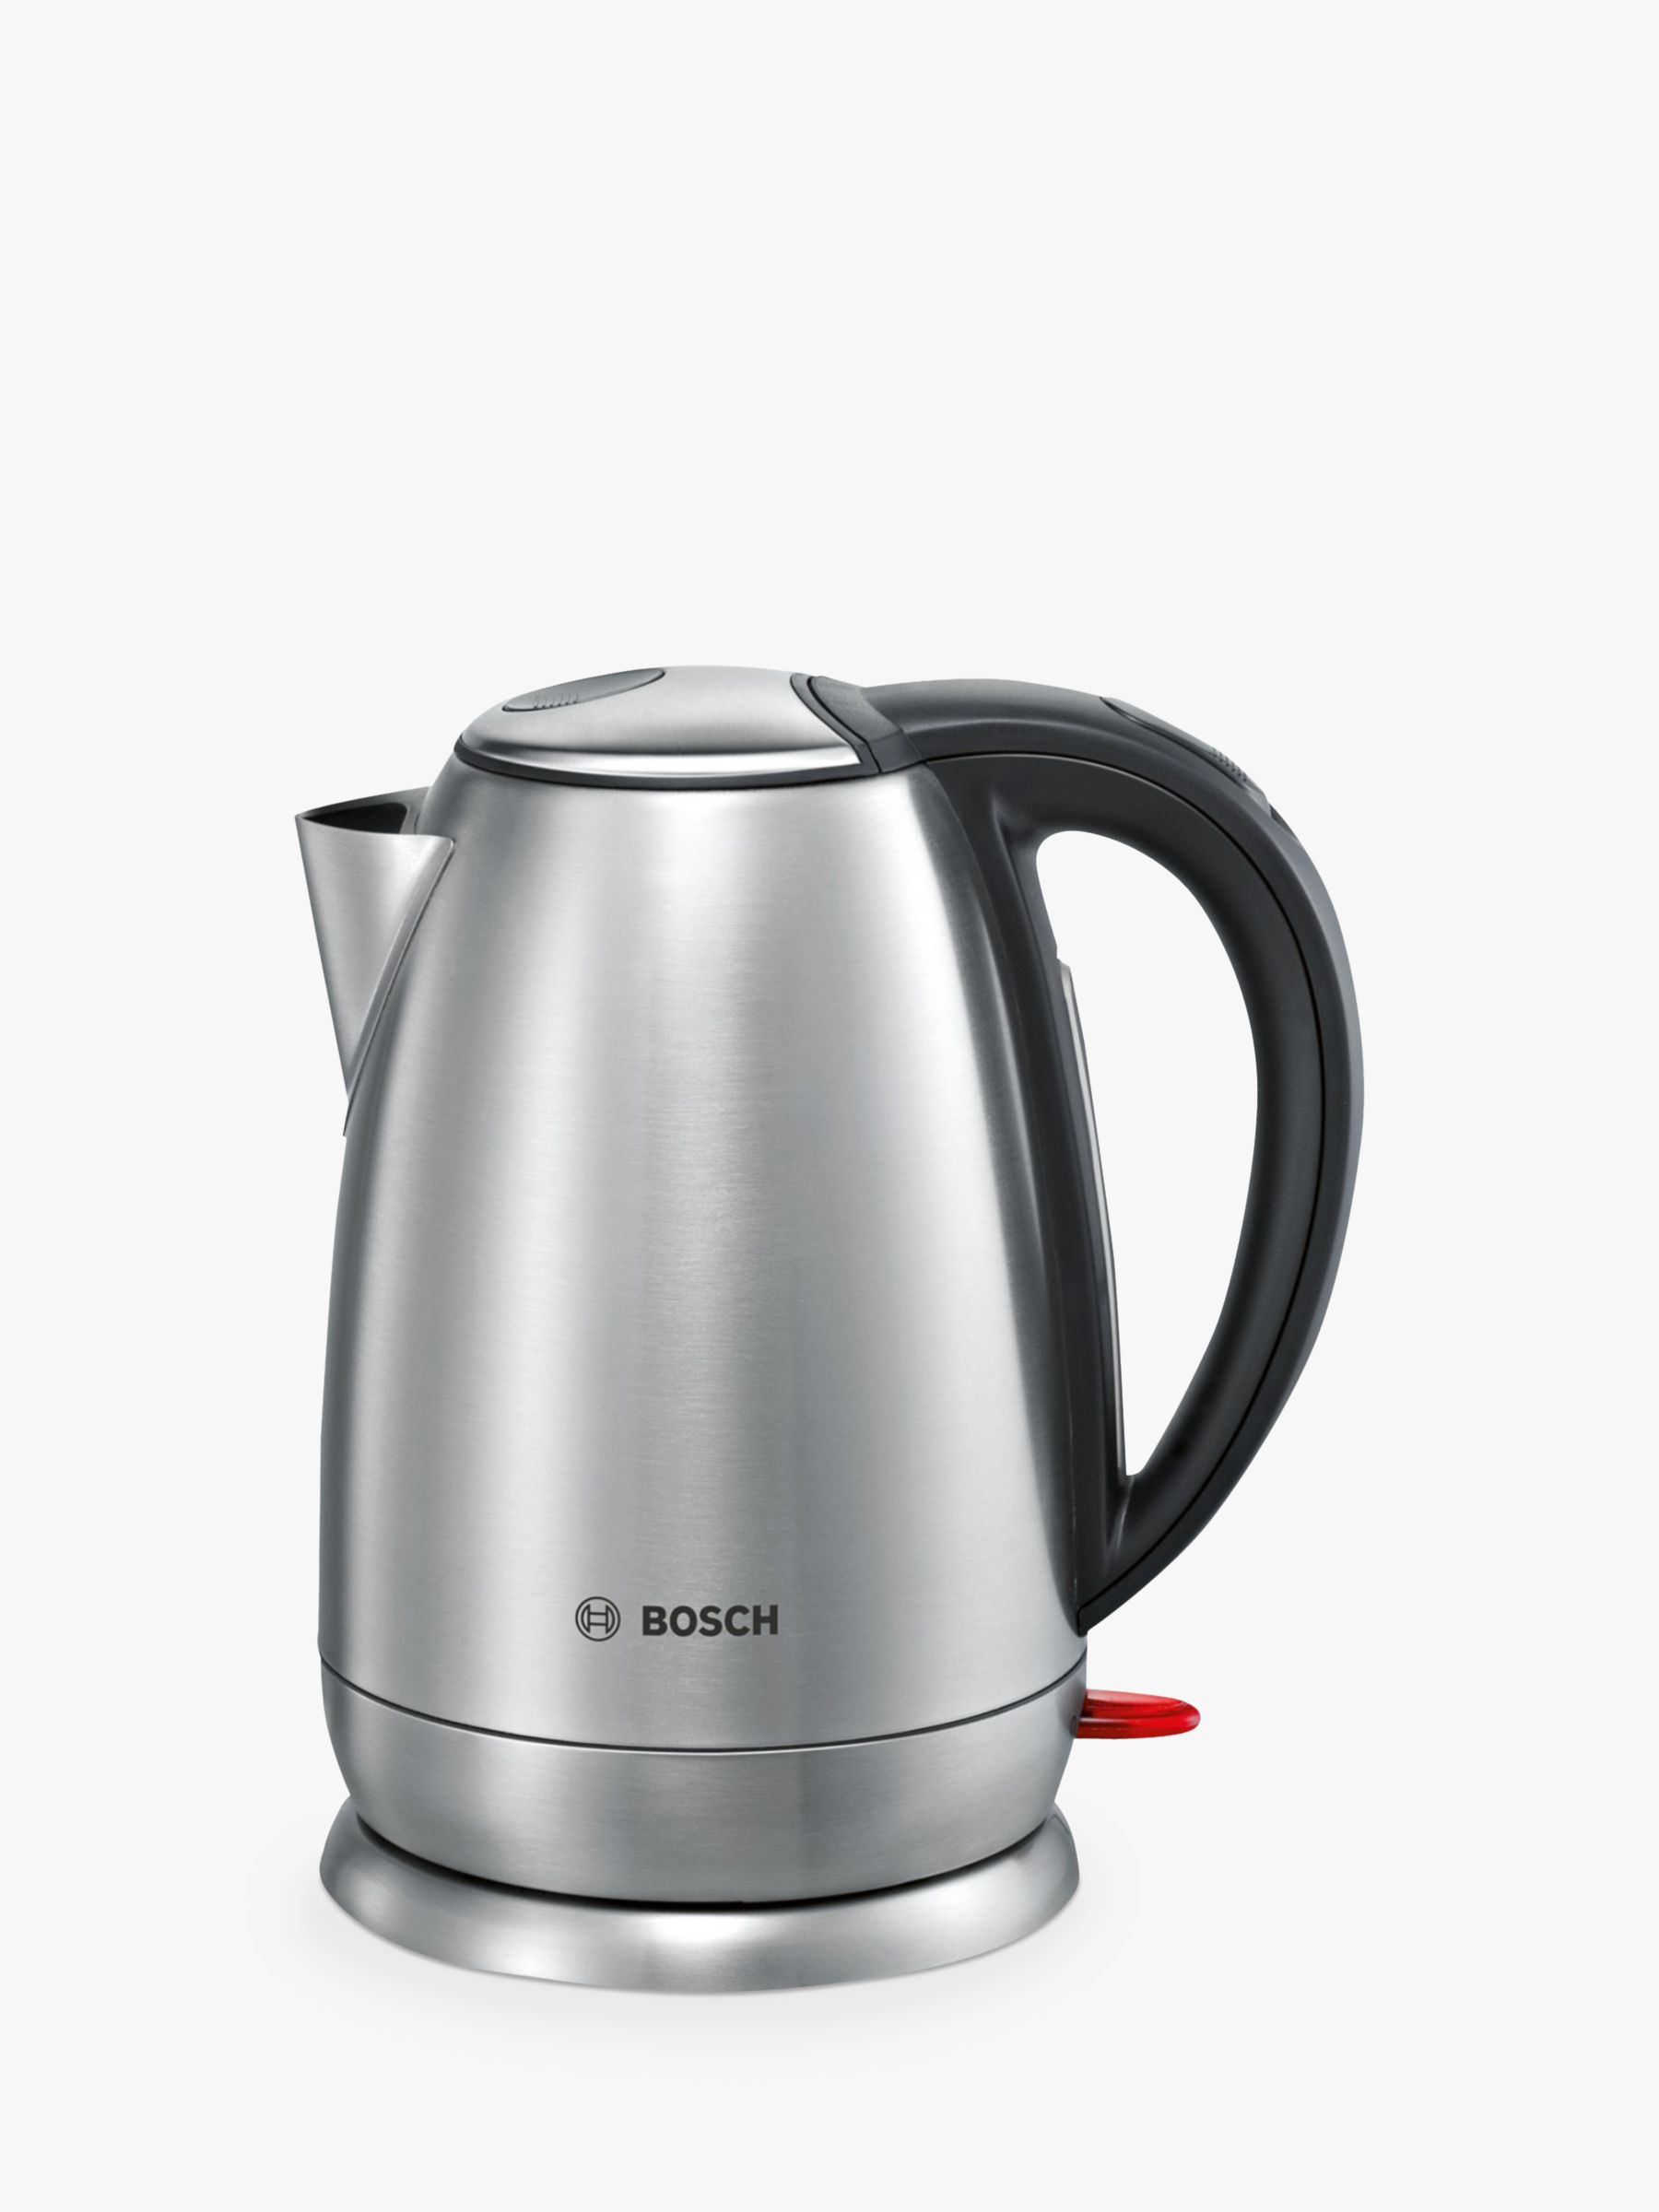 Bosch Town Twk78a01gb Stainless Steel Kettle Silver At John Lewis